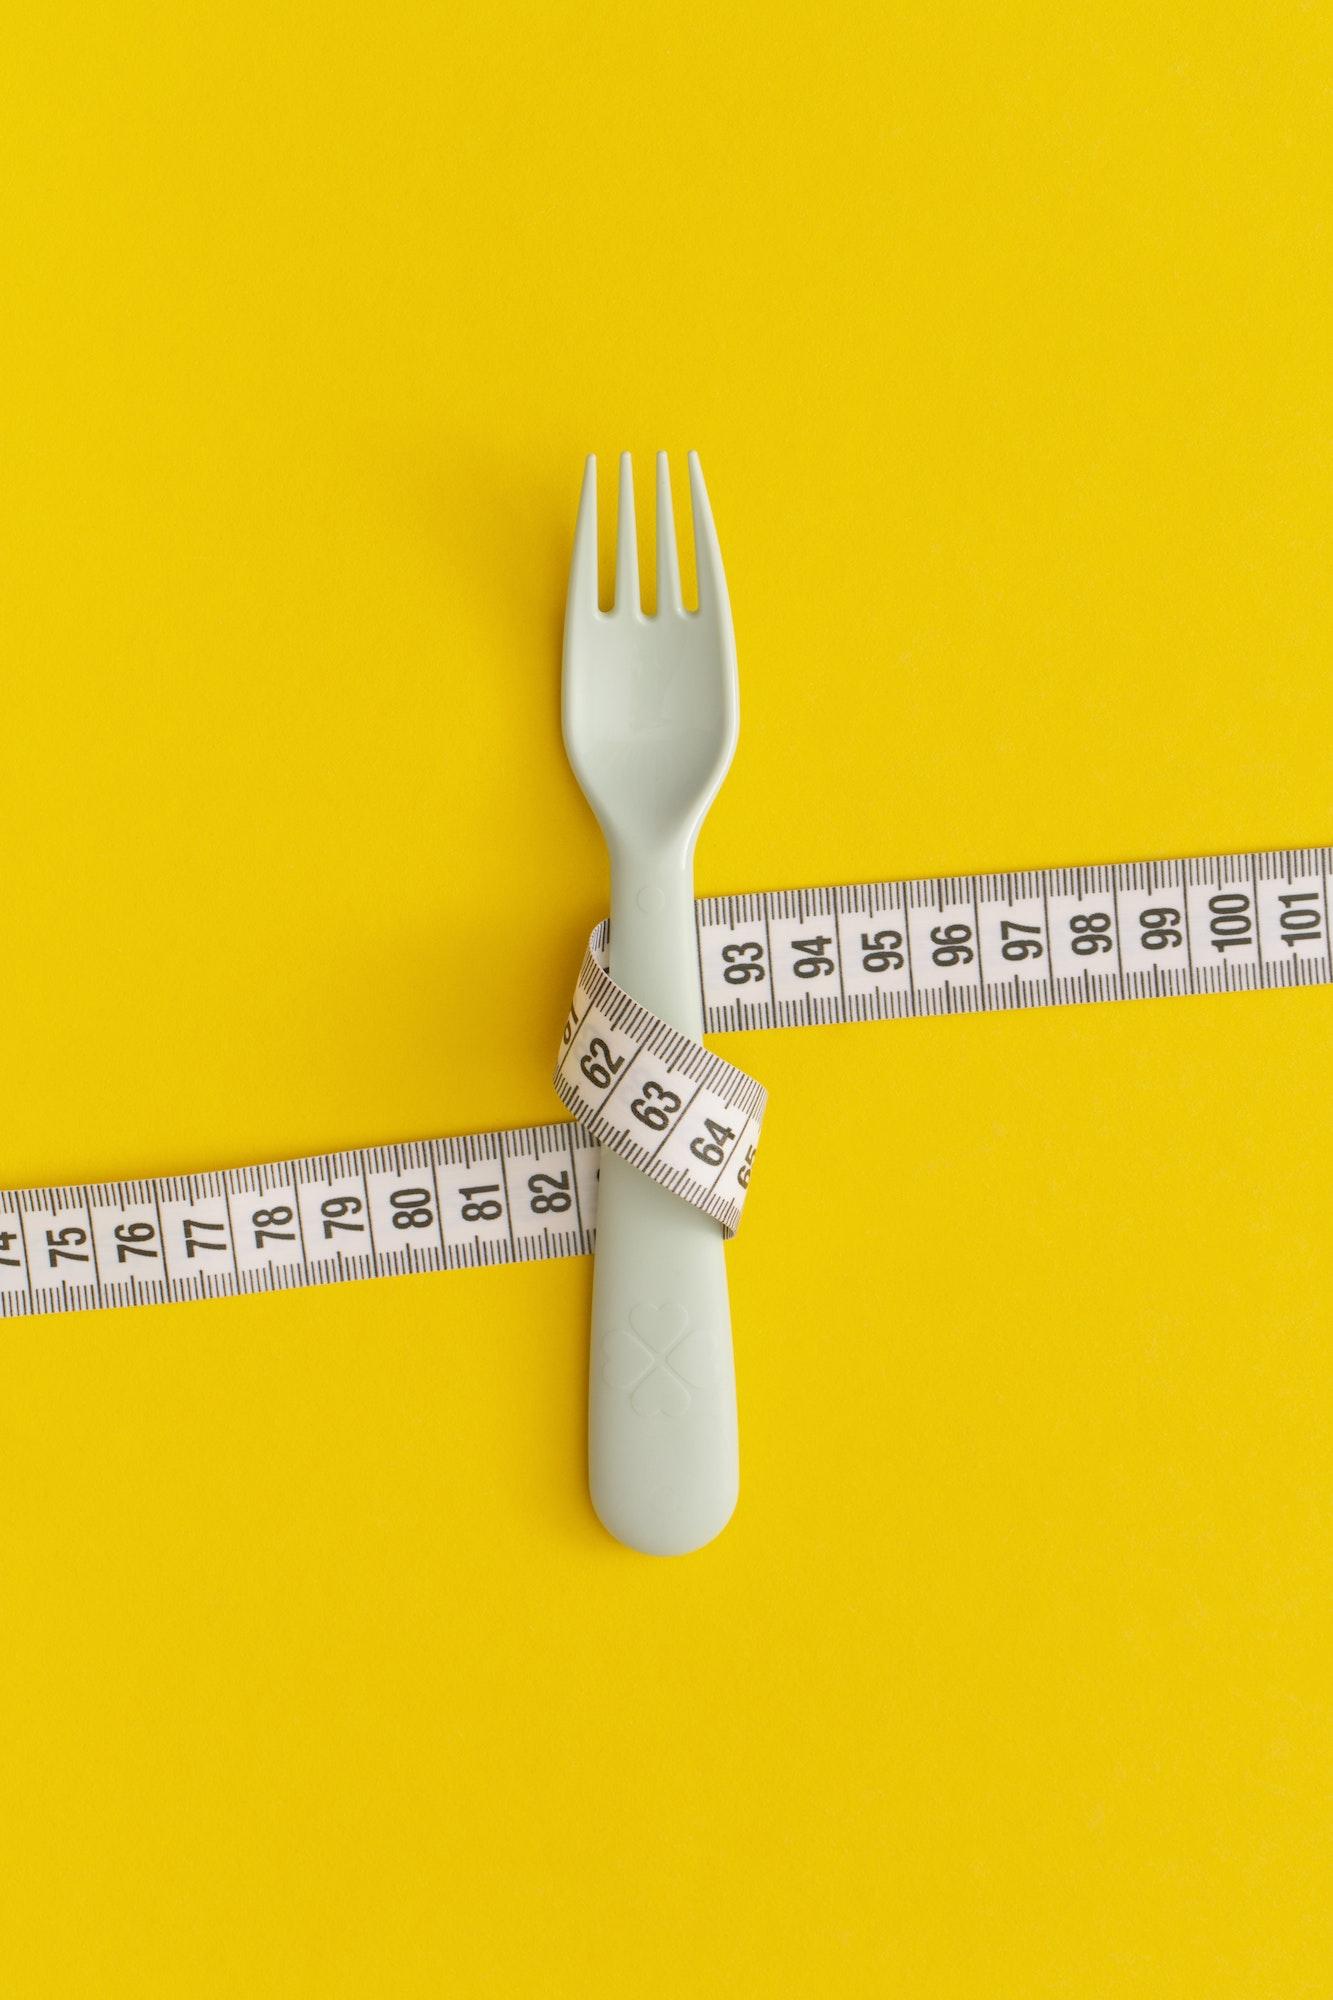 Measuring tape and fork on yellow background. Weight loss concept